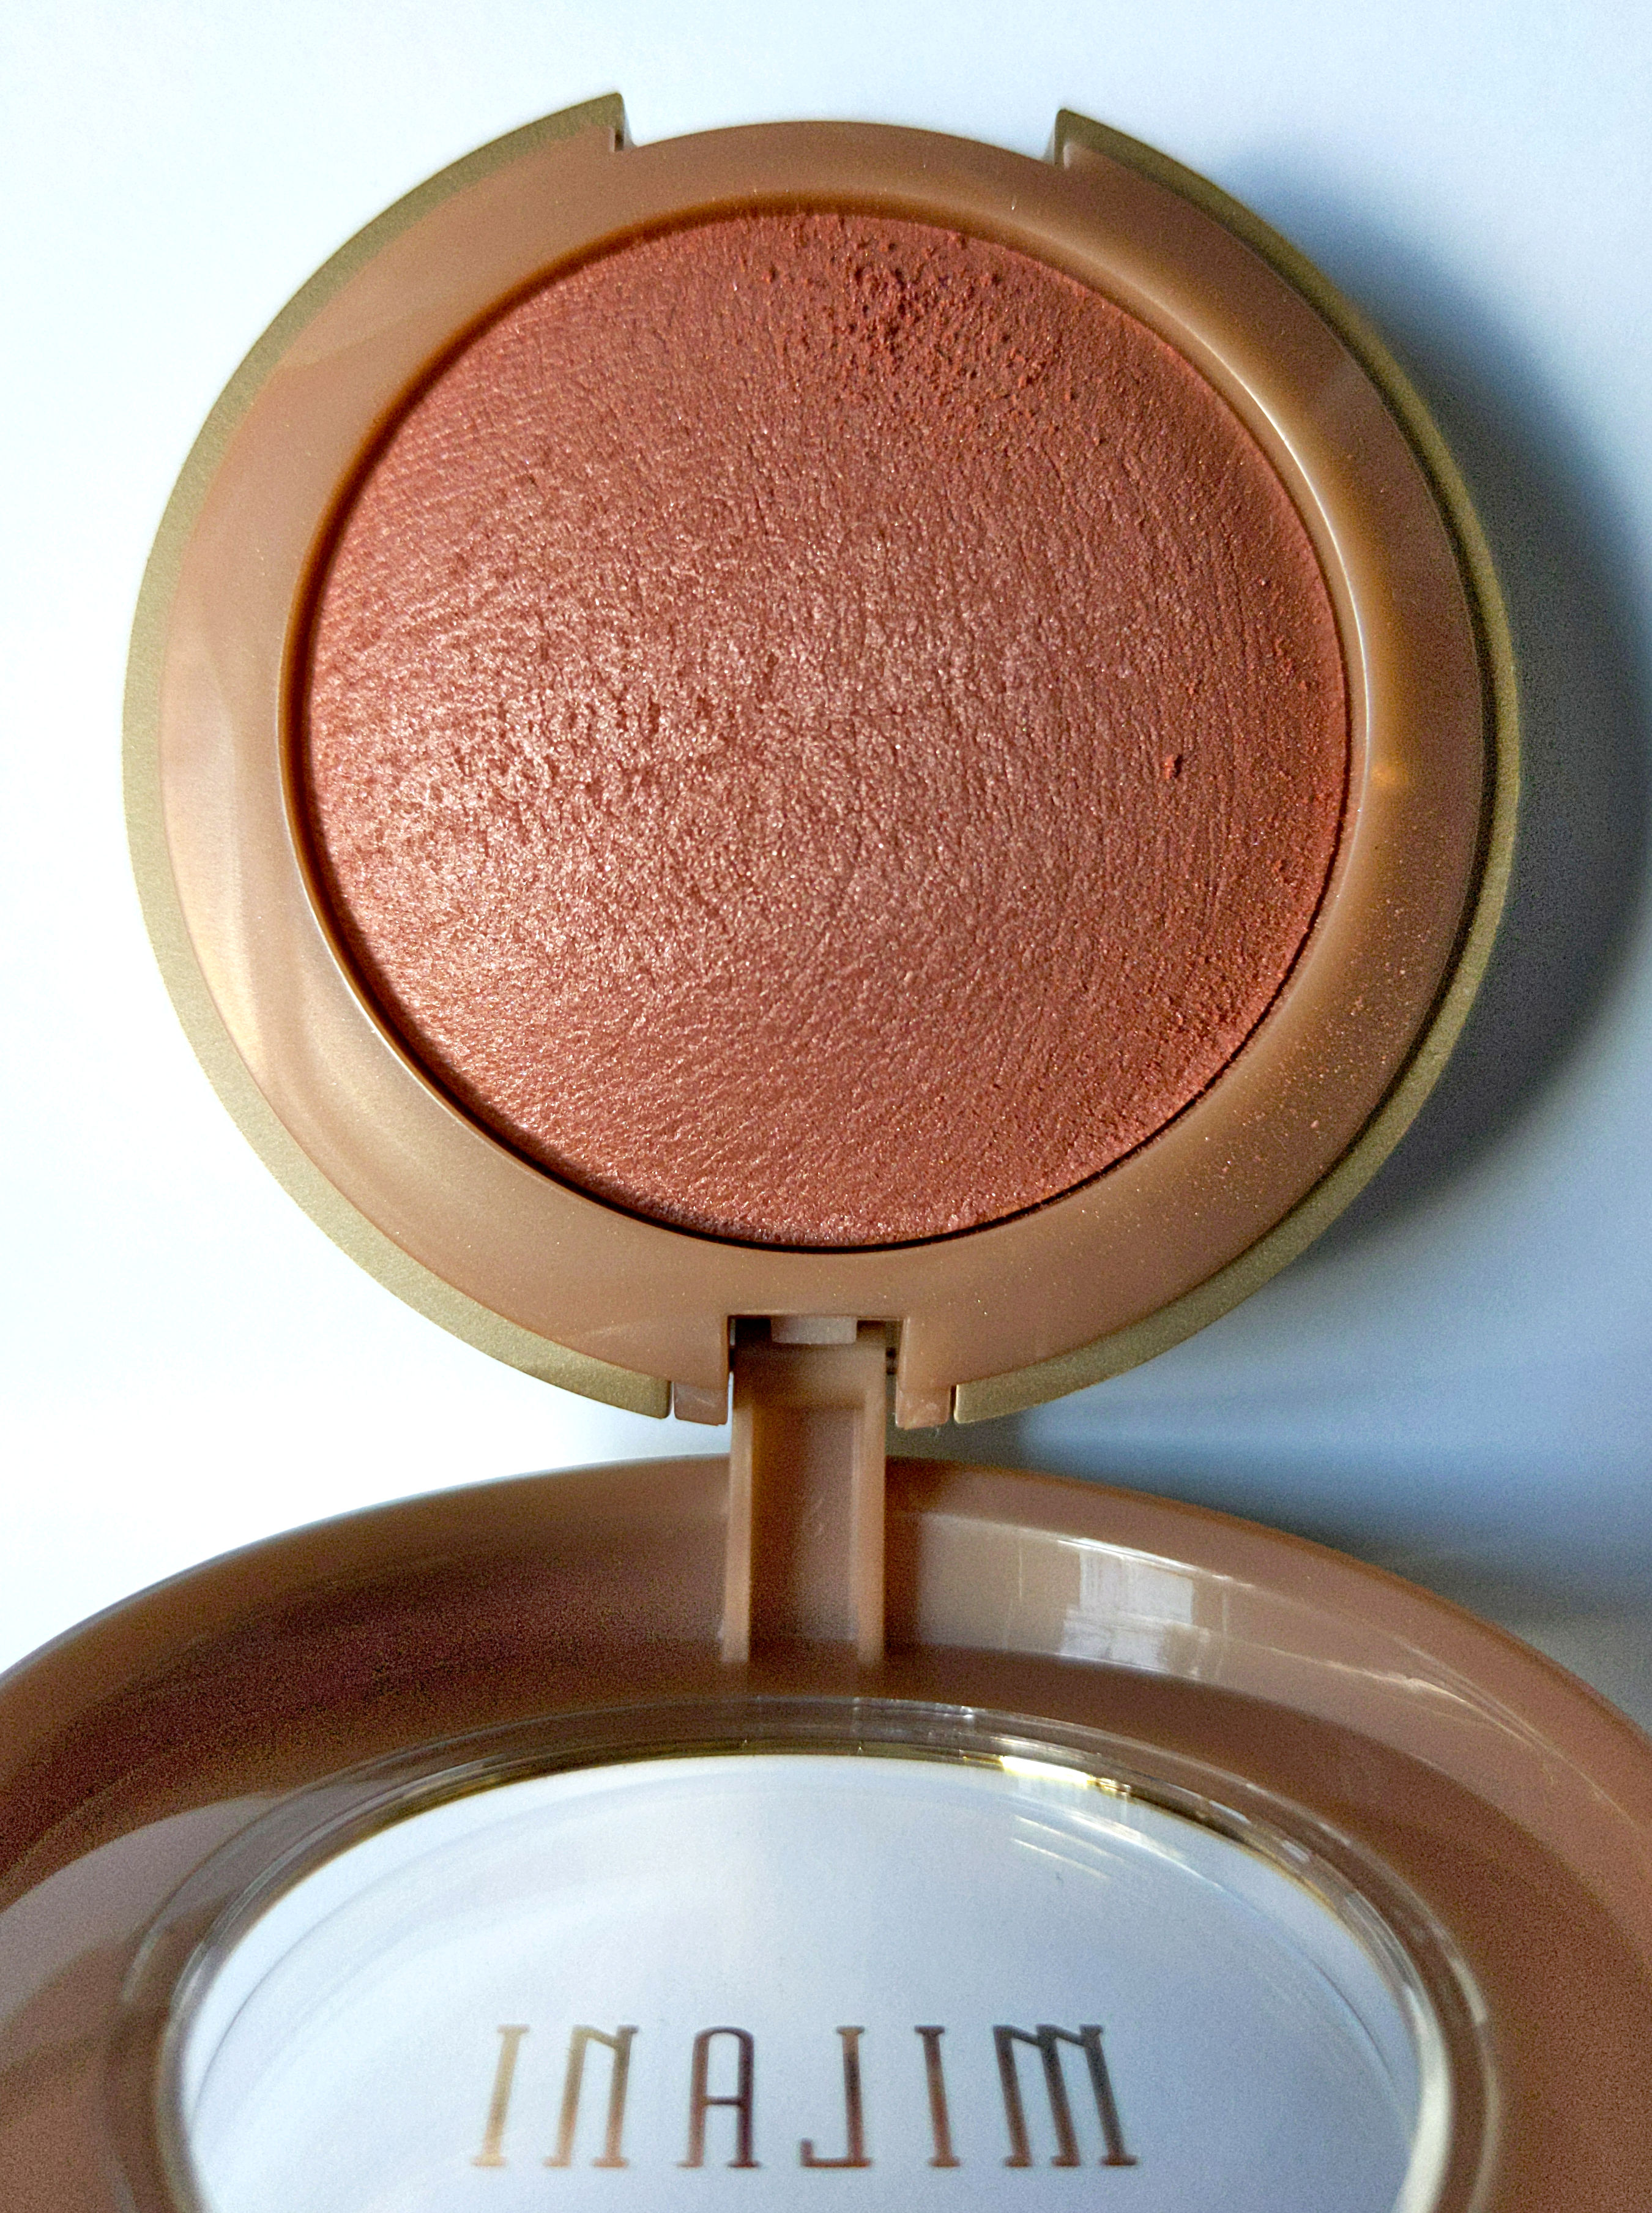 A close-up of Milani Baked Powder Blush in 15 Sunset Passione.